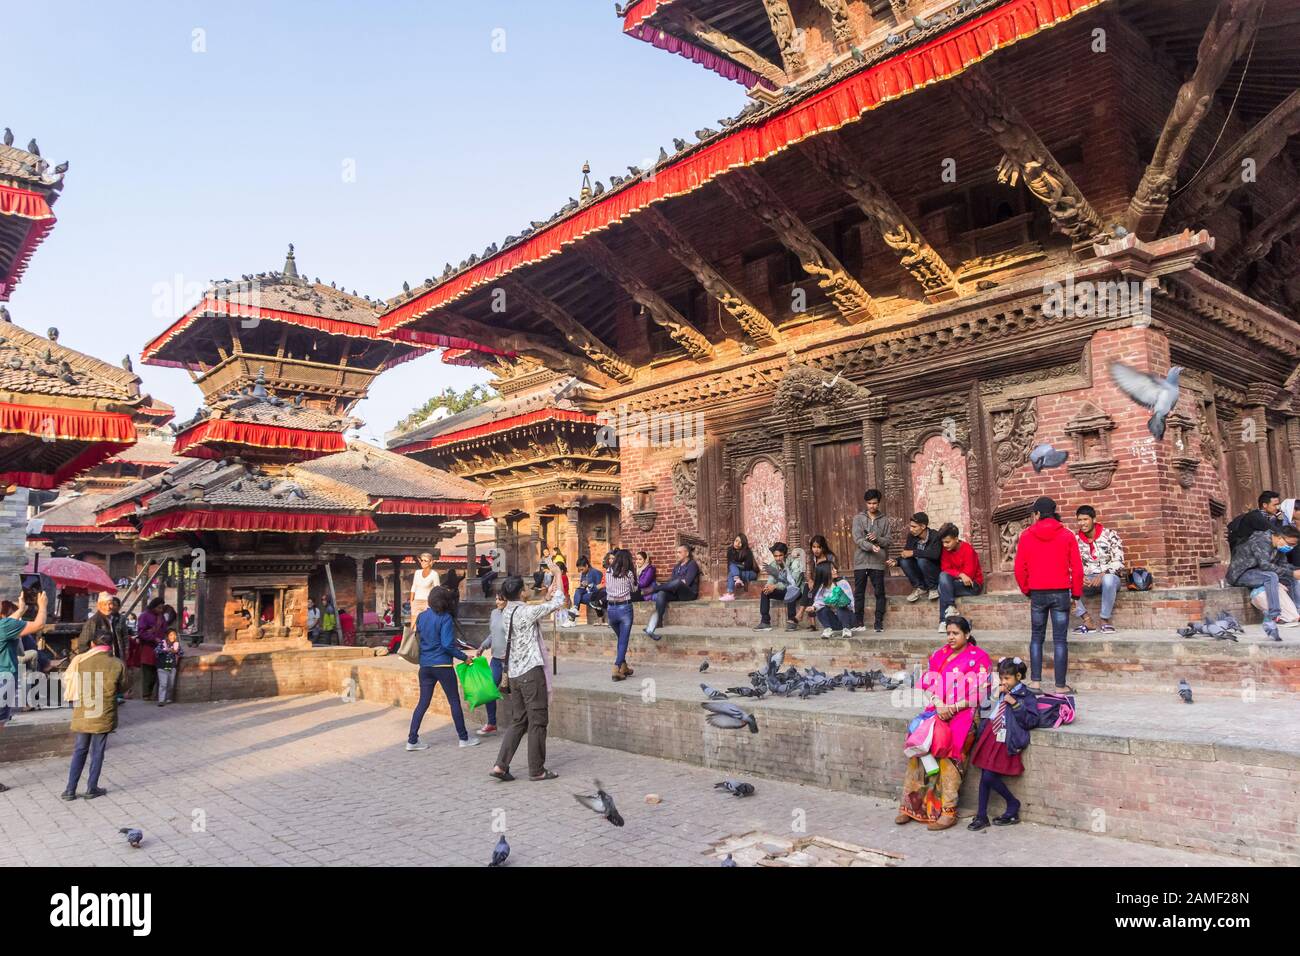 People, temples and dovs at Durbar square in Kathmandu, Nepal Stock Photo